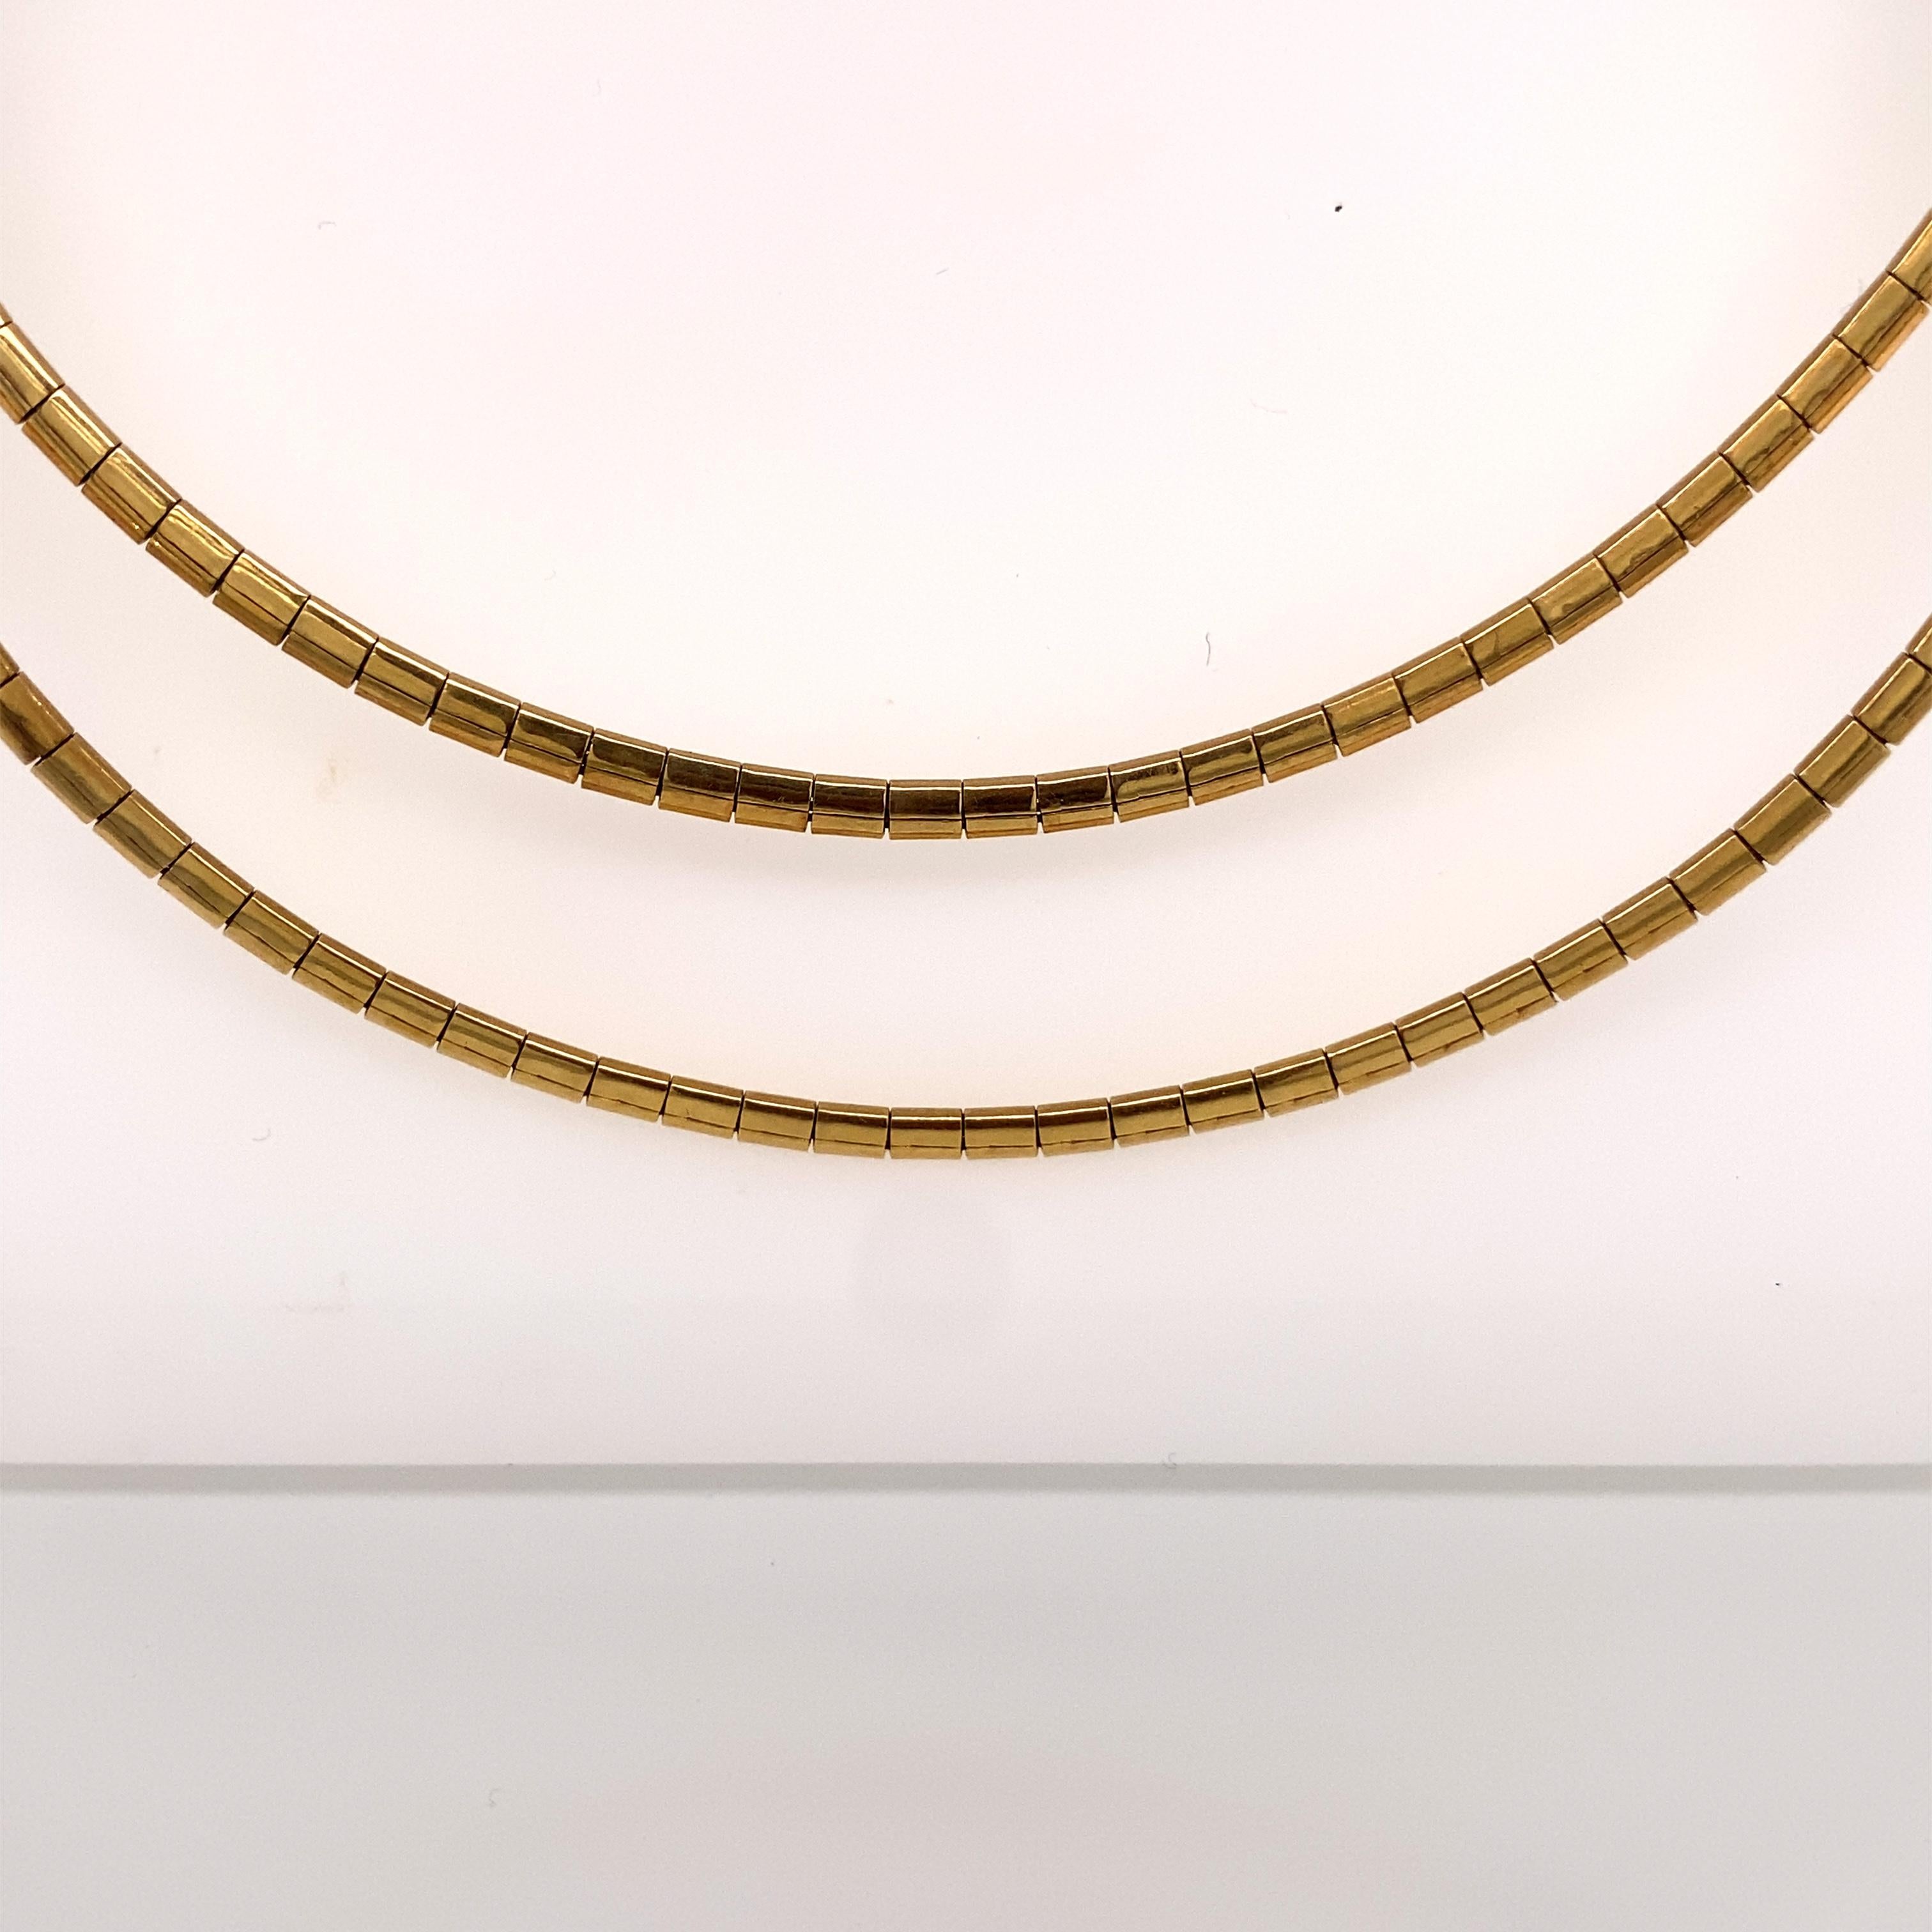 Vintage 1980's 14K Yellow Gold Layered Omega Necklace - The necklace measures 15.5 inches long, the 2nd chain drops down another .75 inches and the width is 2.5mm. The necklace has a plunger clasp with a safety latch. The necklace weighs 20.6 grams.